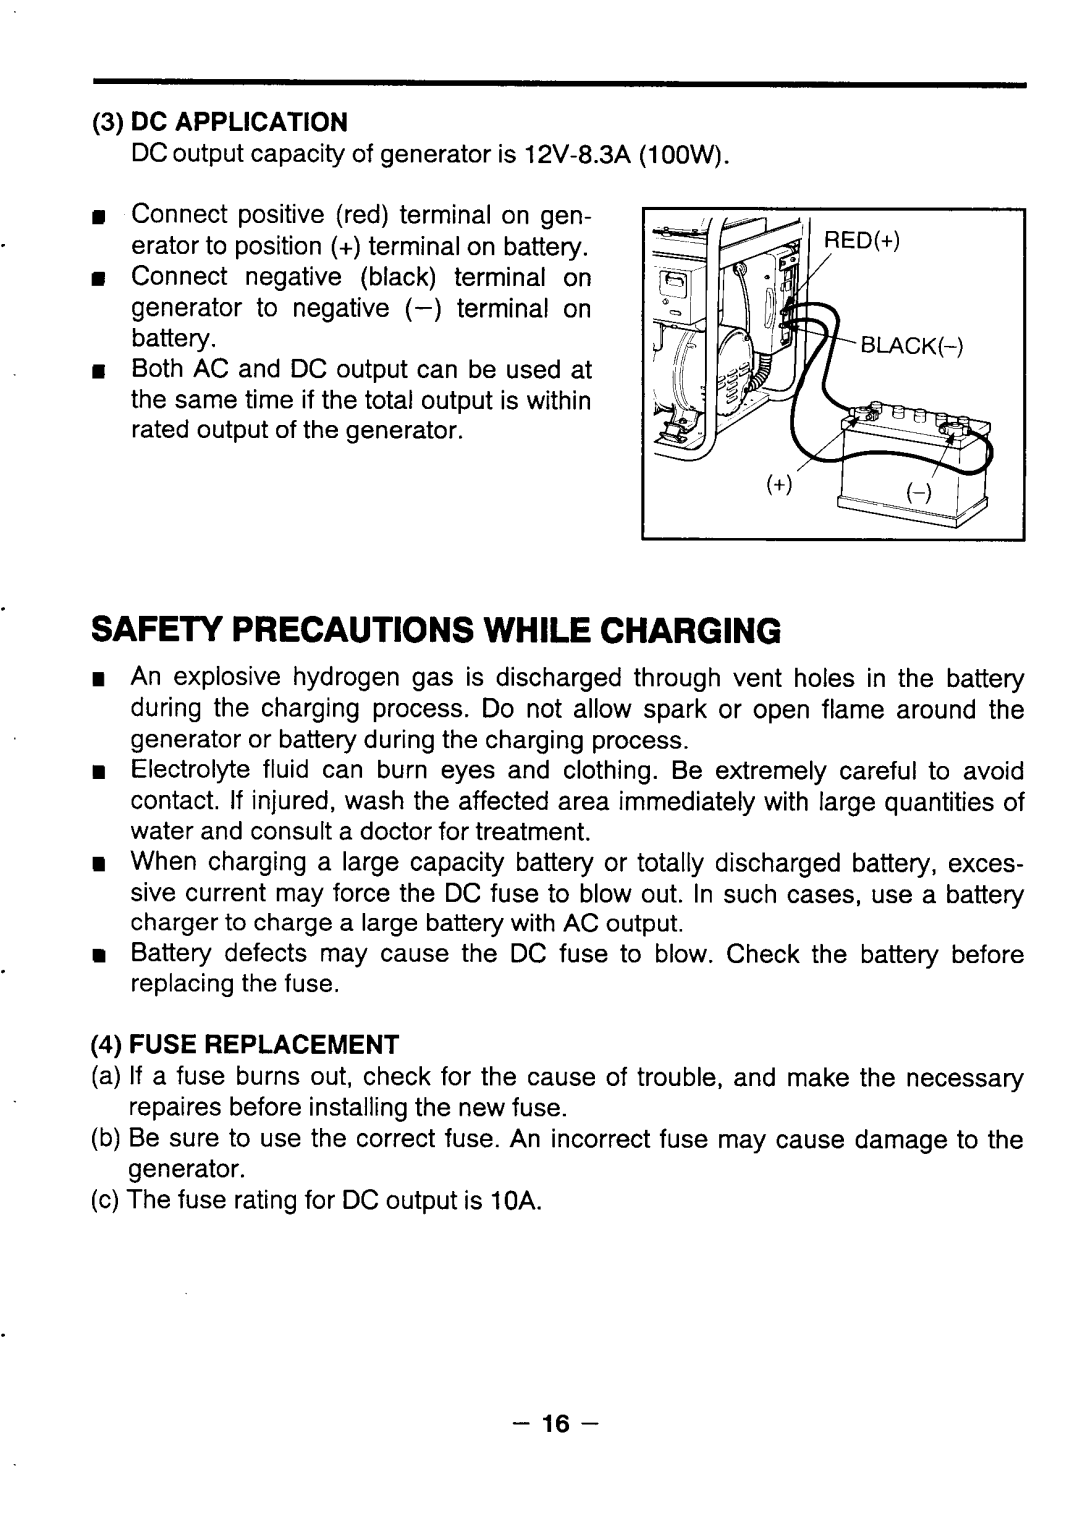 Makita G3511R, G571O R, G5711R, G351O R, G341O R manual Safety Precautions While Charging, 3DC APPLICATION, 4FUSE REPLACEMENT 